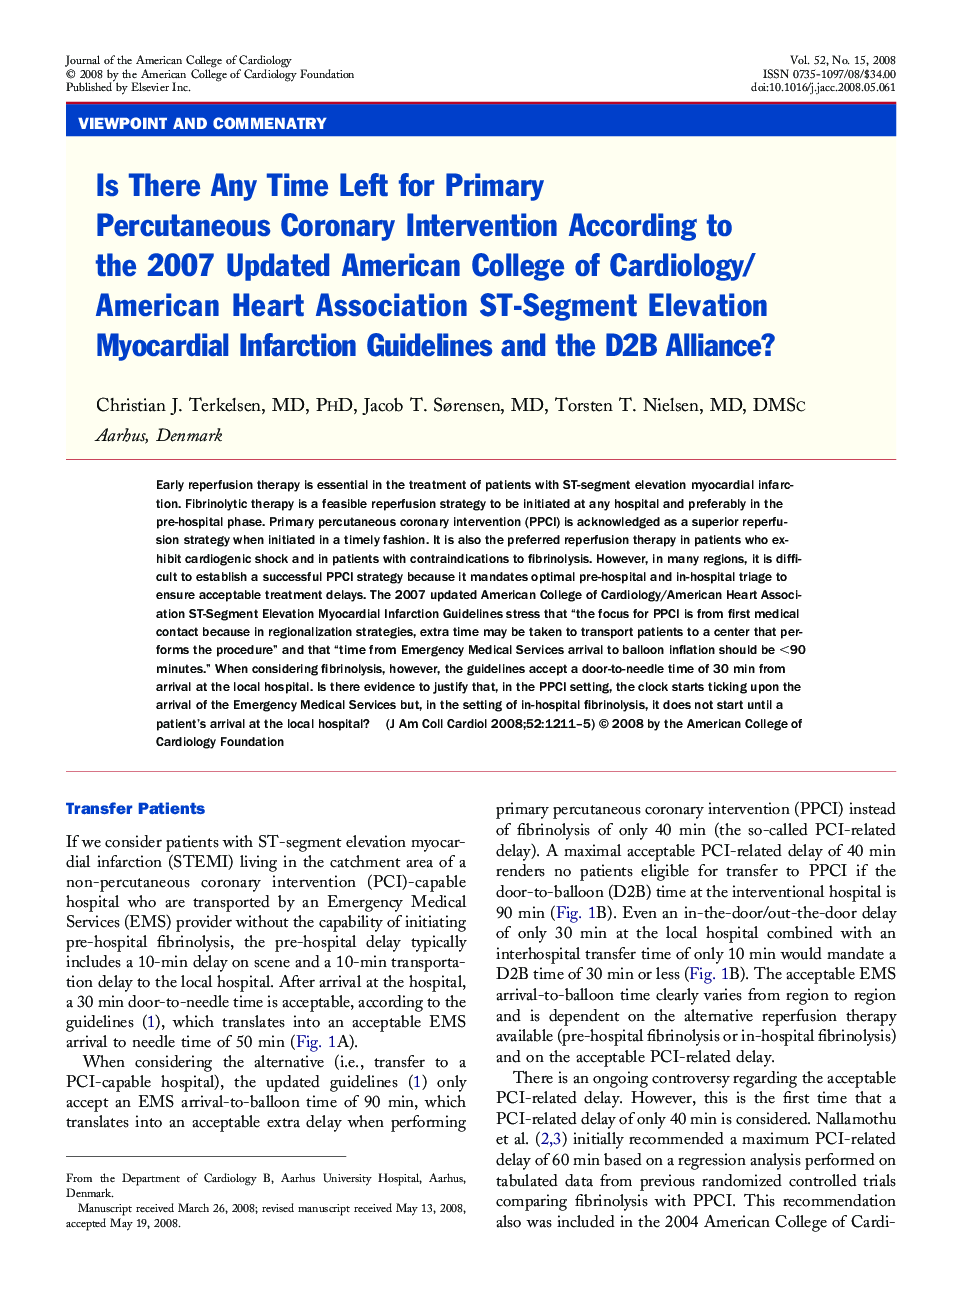 Is There Any Time Left for Primary Percutaneous Coronary Intervention According to the 2007 Updated American College of Cardiology/American Heart Association ST-Segment Elevation Myocardial Infarction Guidelines and the D2B Alliance?